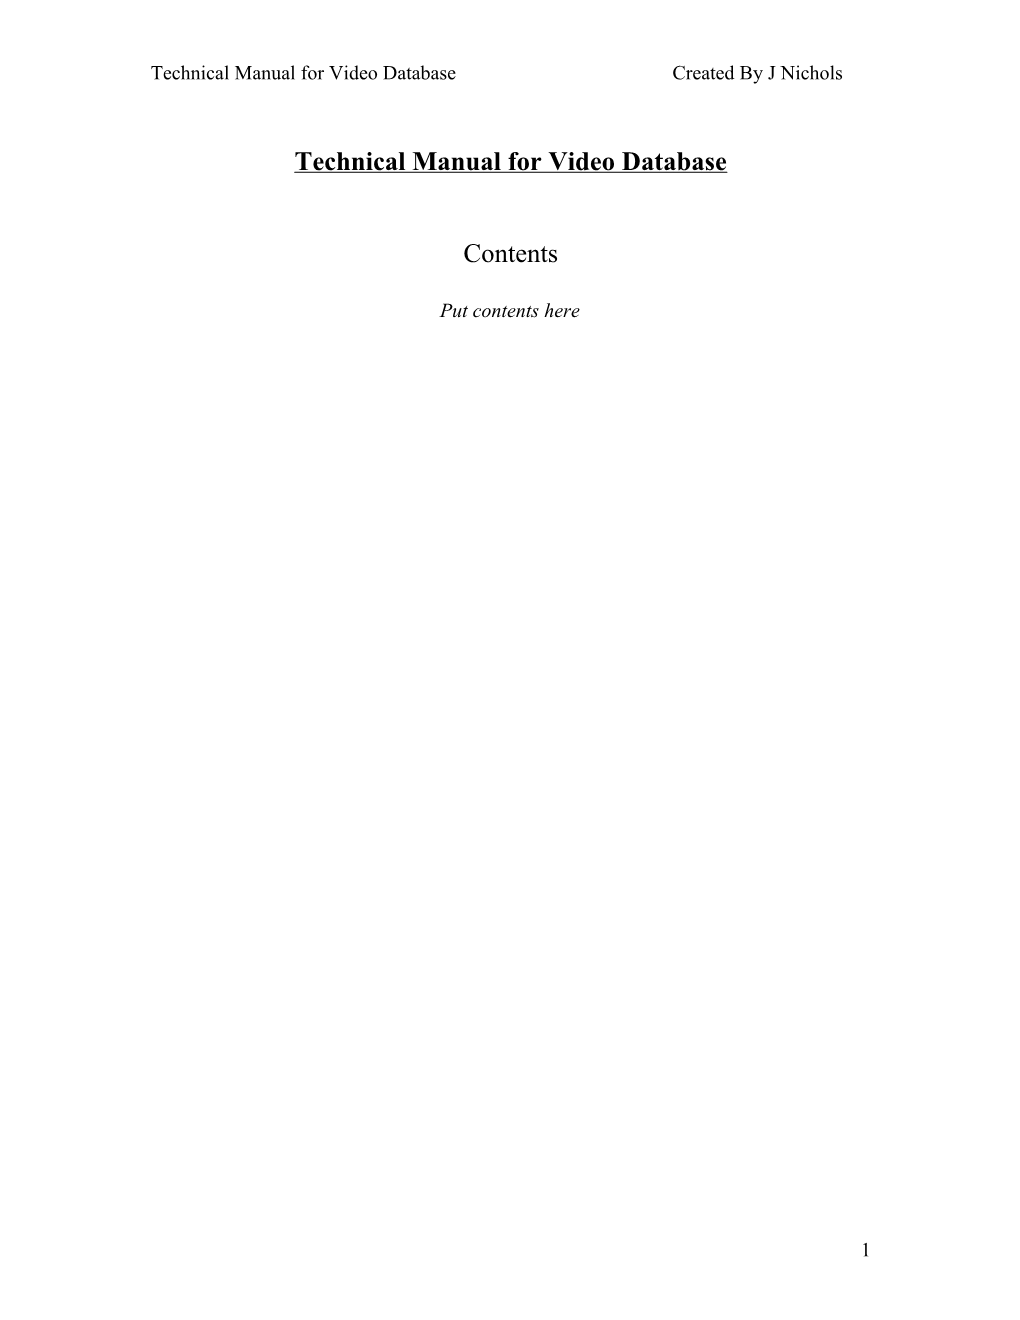 Technical Manual for Video Databasecreated by J Nichols